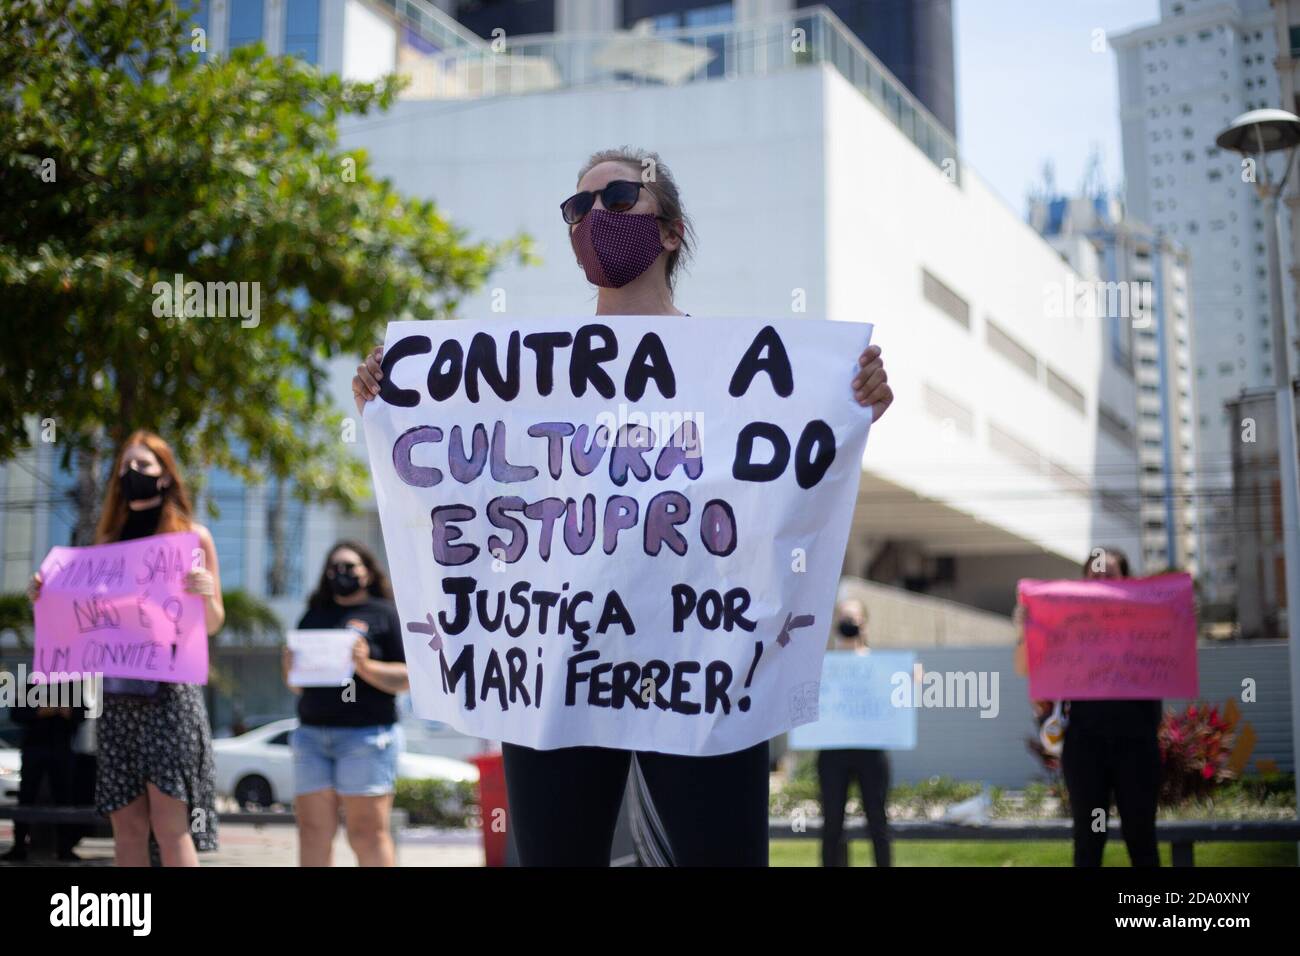 Balneario Camboriu, Santa Catarina. 8th Nov, 2020. (INT) Protest in defense of Mariana Ferrer . November 8, 2020, Camboriu, Santa Catarina, Brazil: Activists gather on the beach in Balneario Camboriu in Santa Catarina, to protest in defense of Mariana Ferrer, a model. Mariana Ferrer accuses businessman Andre de Camargo Aranha of raping her in December 2018, during a party at a beach club in Florianopolis. He was acquitted by the courts.Credit: Matheus Pe/Thenews2 Credit: Matheus Pe/TheNEWS2/ZUMA Wire/Alamy Live News Stock Photo